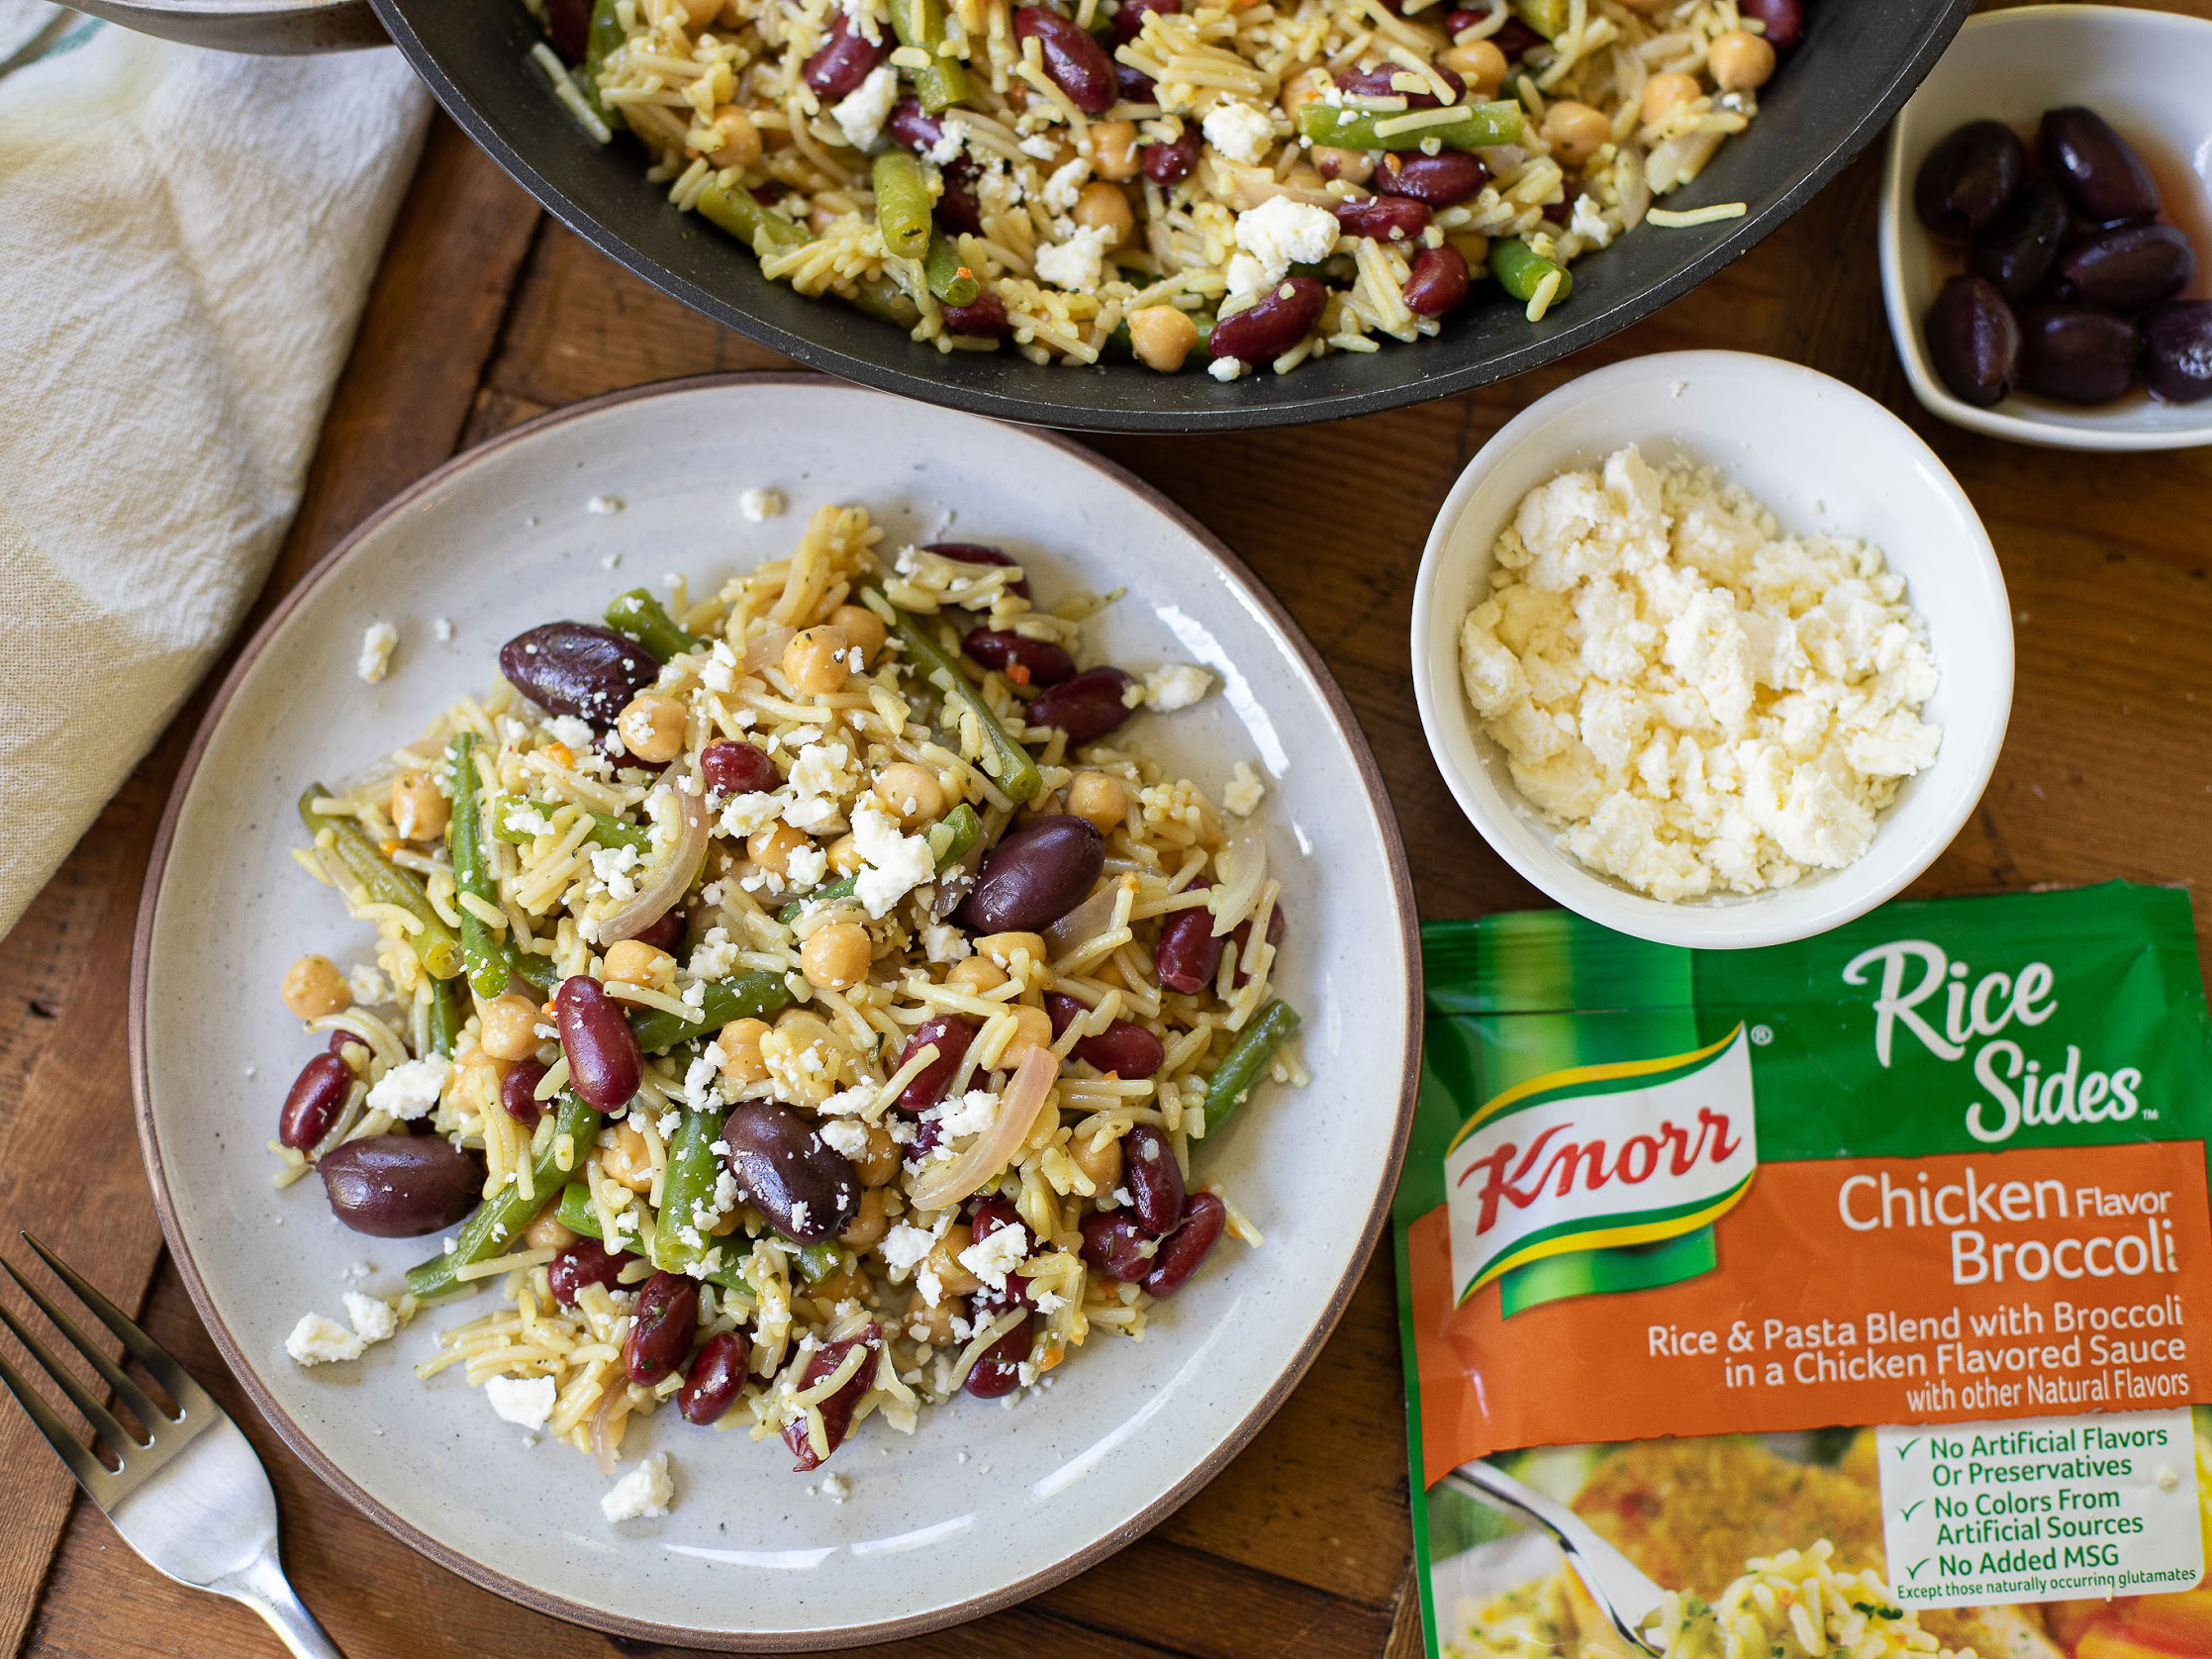 Serve Up This Delicious 3 Bean Rice Salad At Your Next Cookout - Get Great Savings At Publix on I Heart Publix